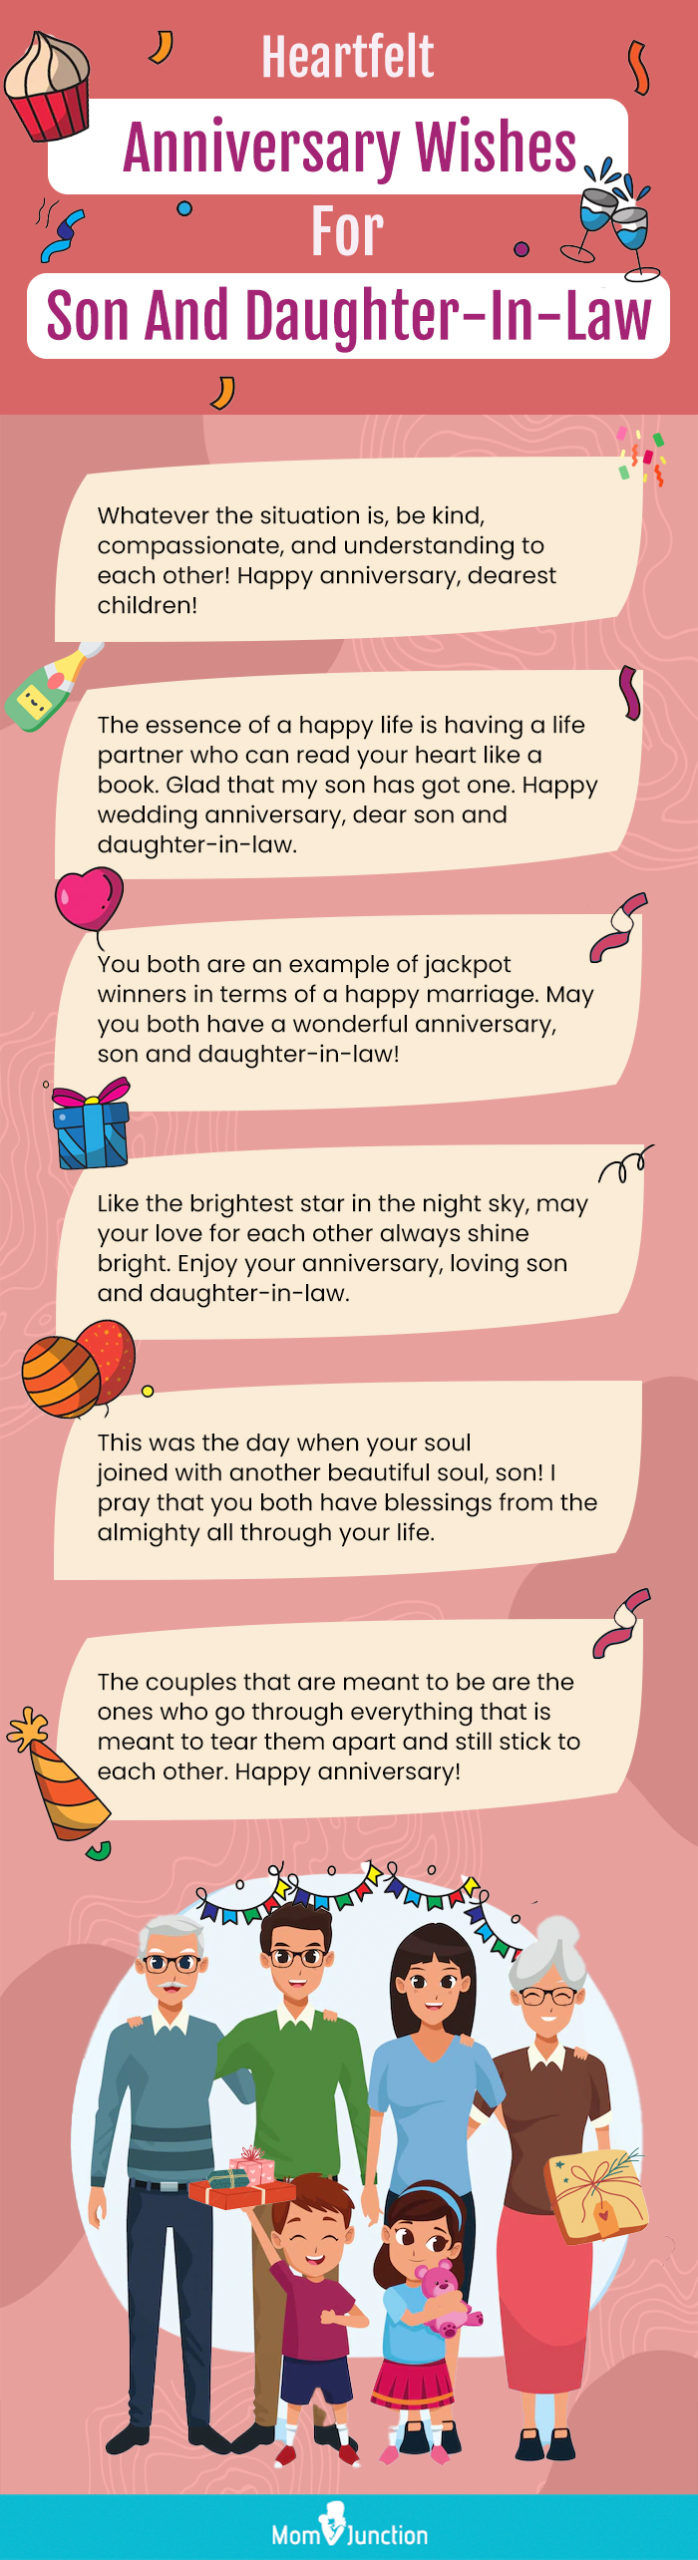 heartfelt anniversary wishes for son and daughter-in-law (infographic)